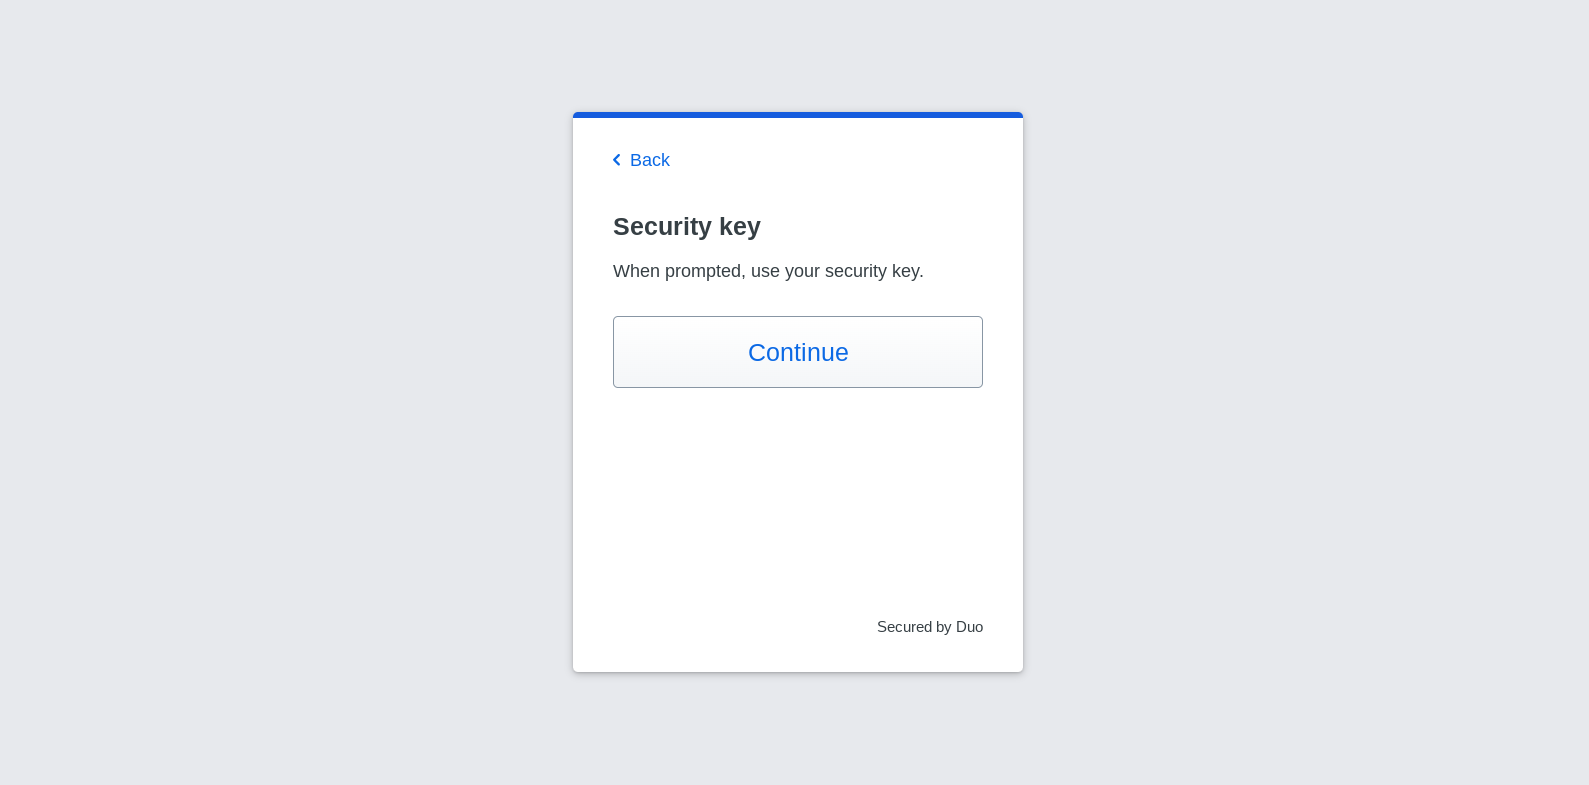 Duo when prompted use your security key screen